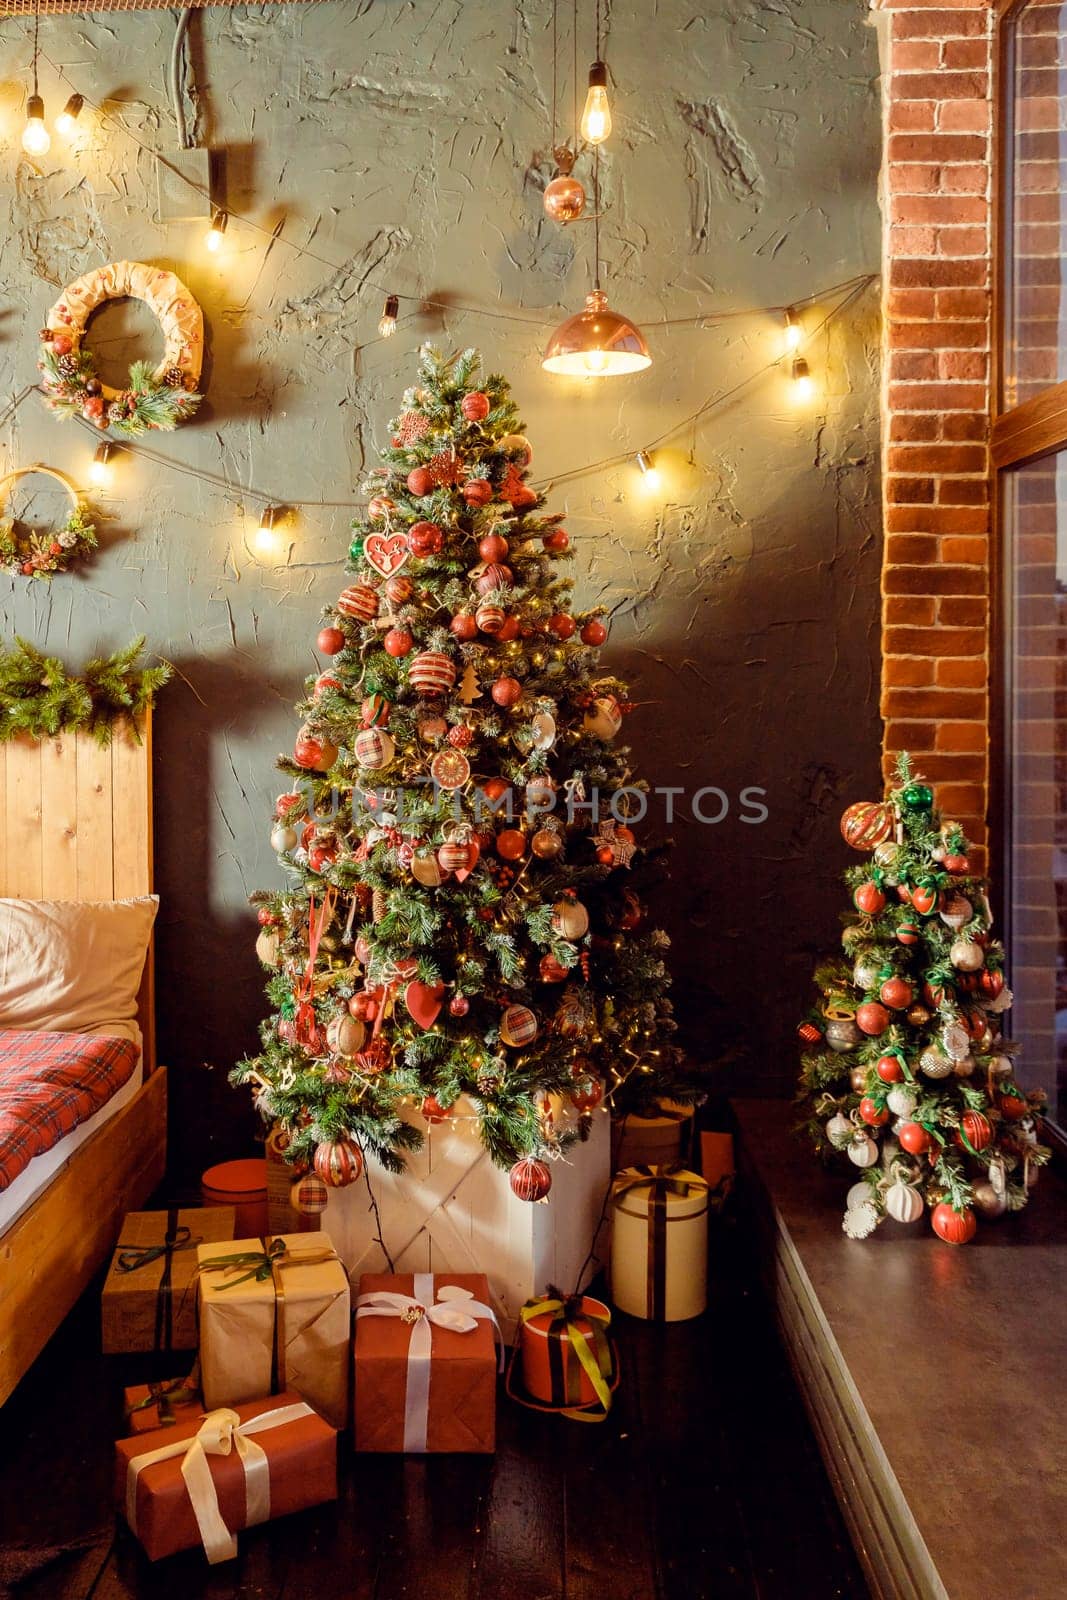 Classical Christmas decorated interior living room library with fireplace. Christmas tree with red golden ornament decorations.